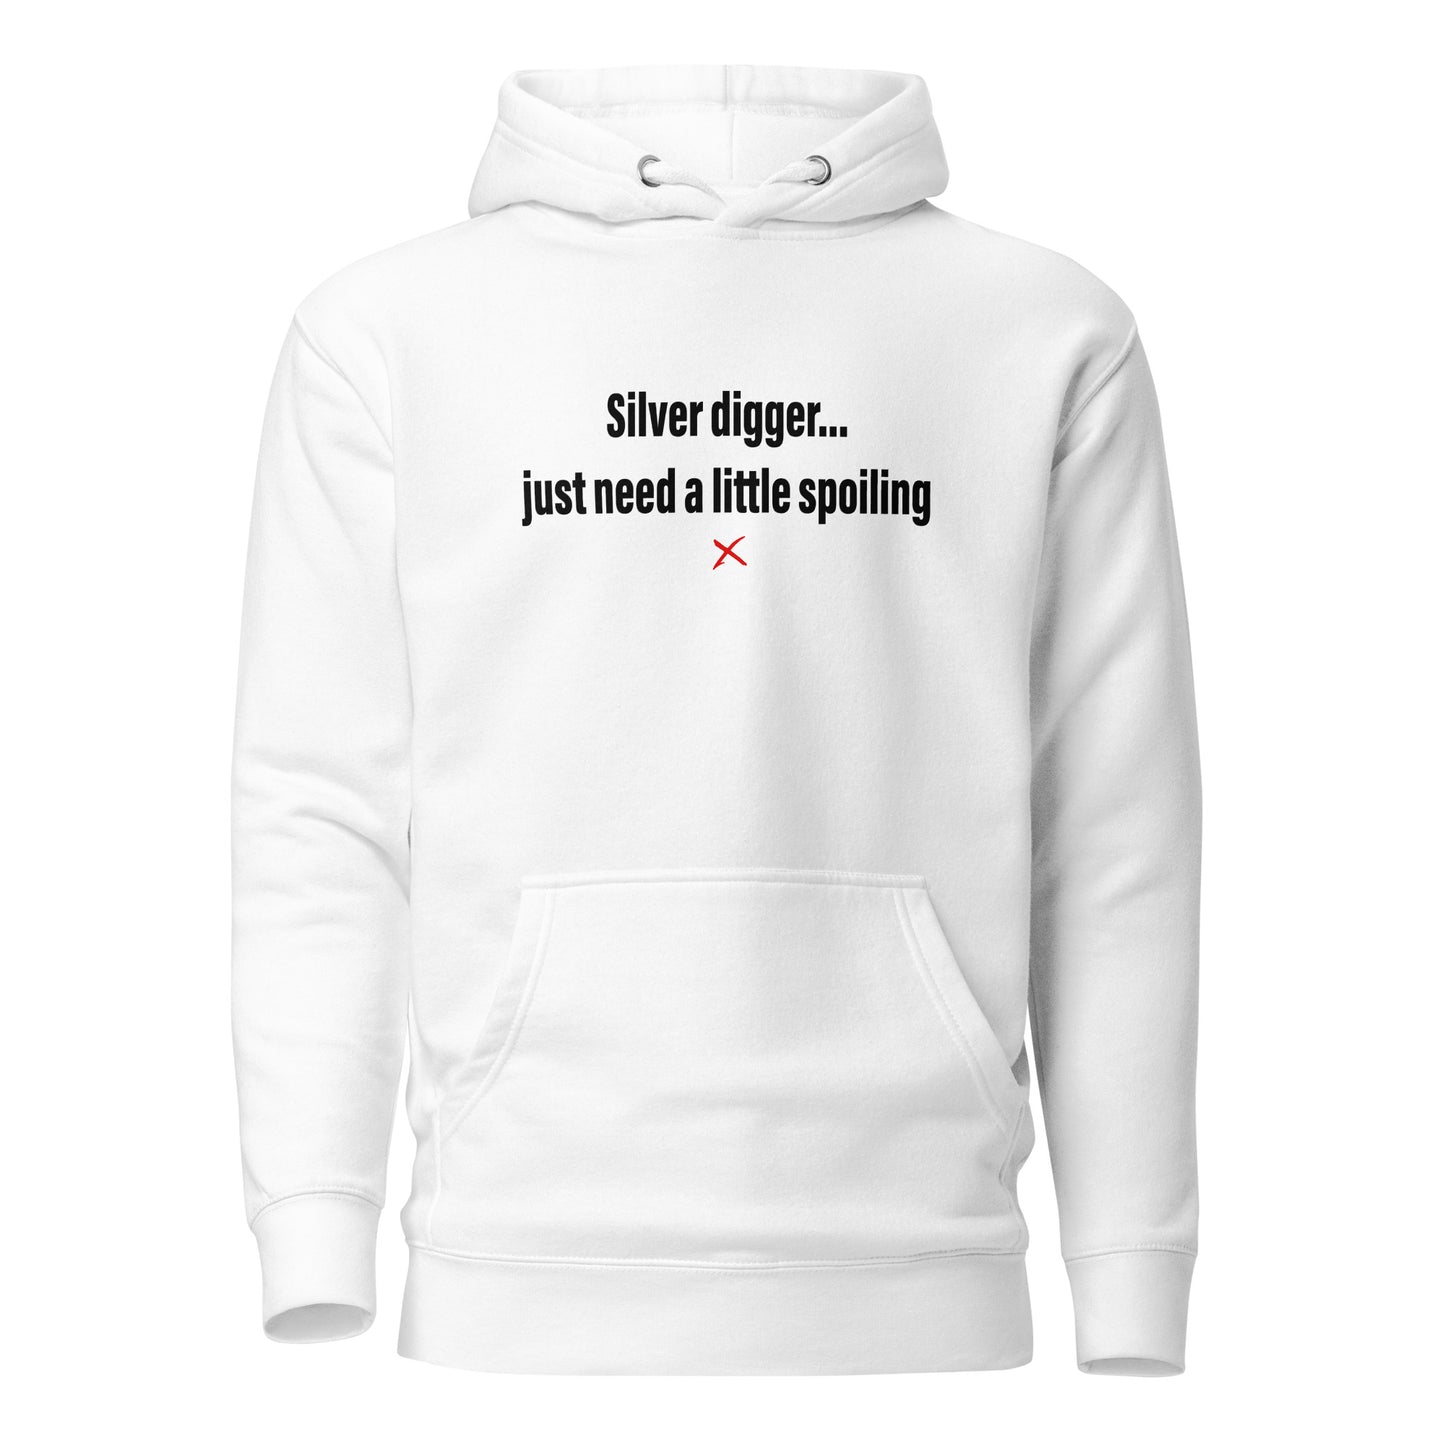 Silver digger... just need a little spoiling - Hoodie